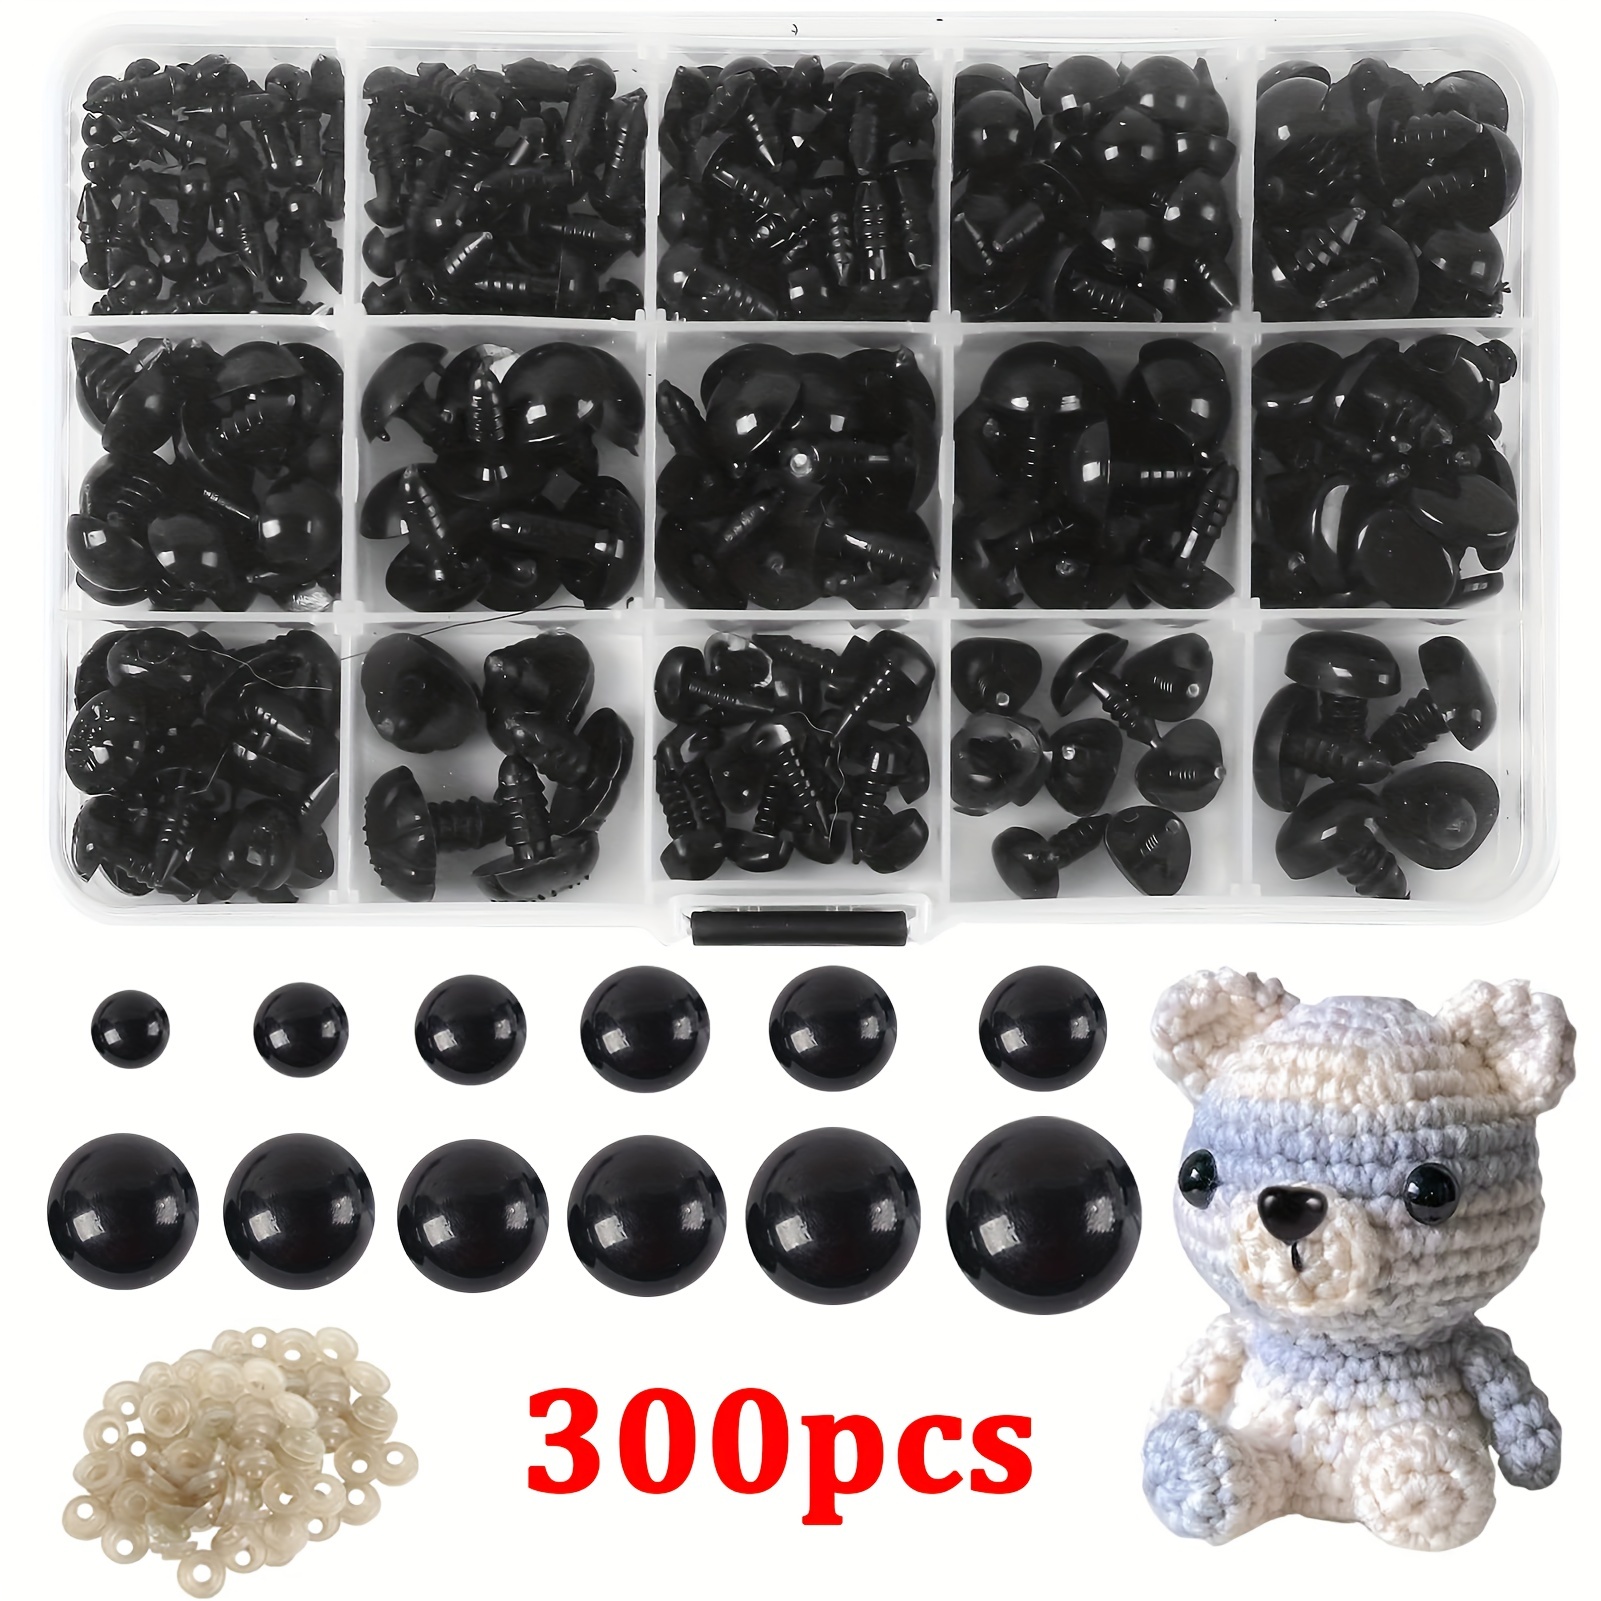 560pcs Plastic Safety Eyes And Noses For Amigurumi Crochet Crafts Dolls  Stuffed Animals And Teddy Bear, Multiple Colors And Sizes